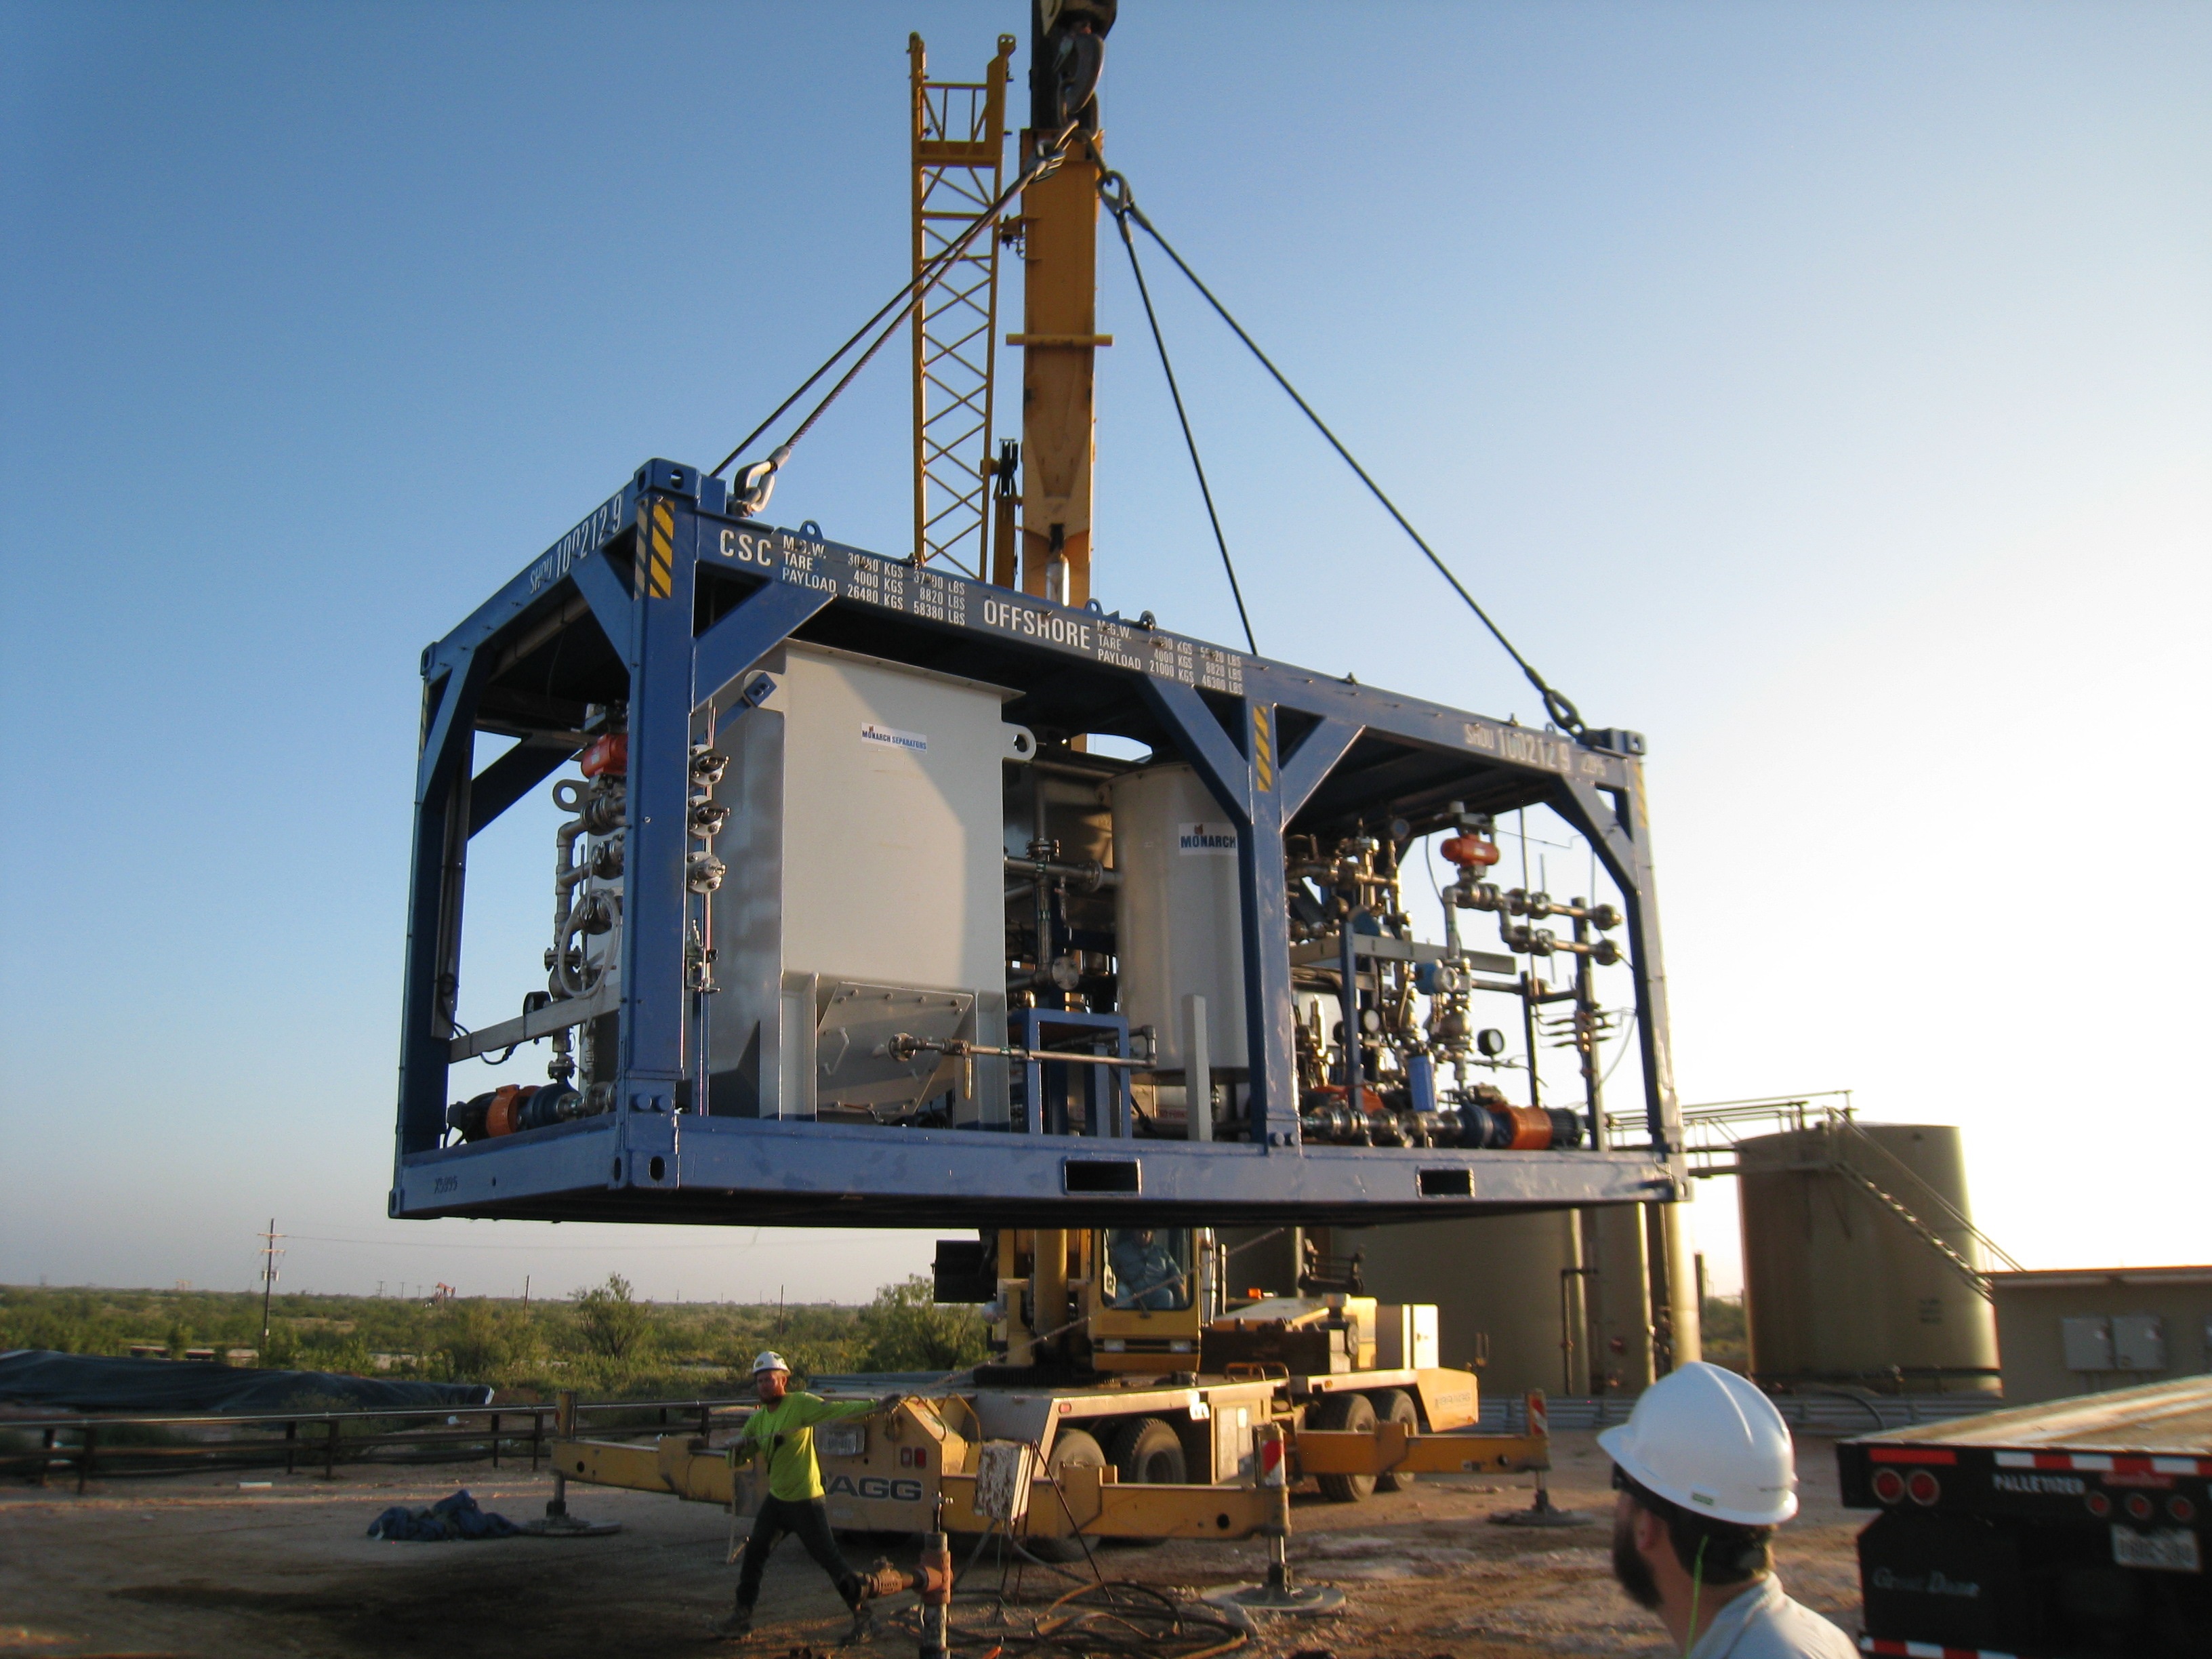 Water Standard’s H2O Spectrum mobile system is being delivered in the Permian Basin. (Source: Water Standard)